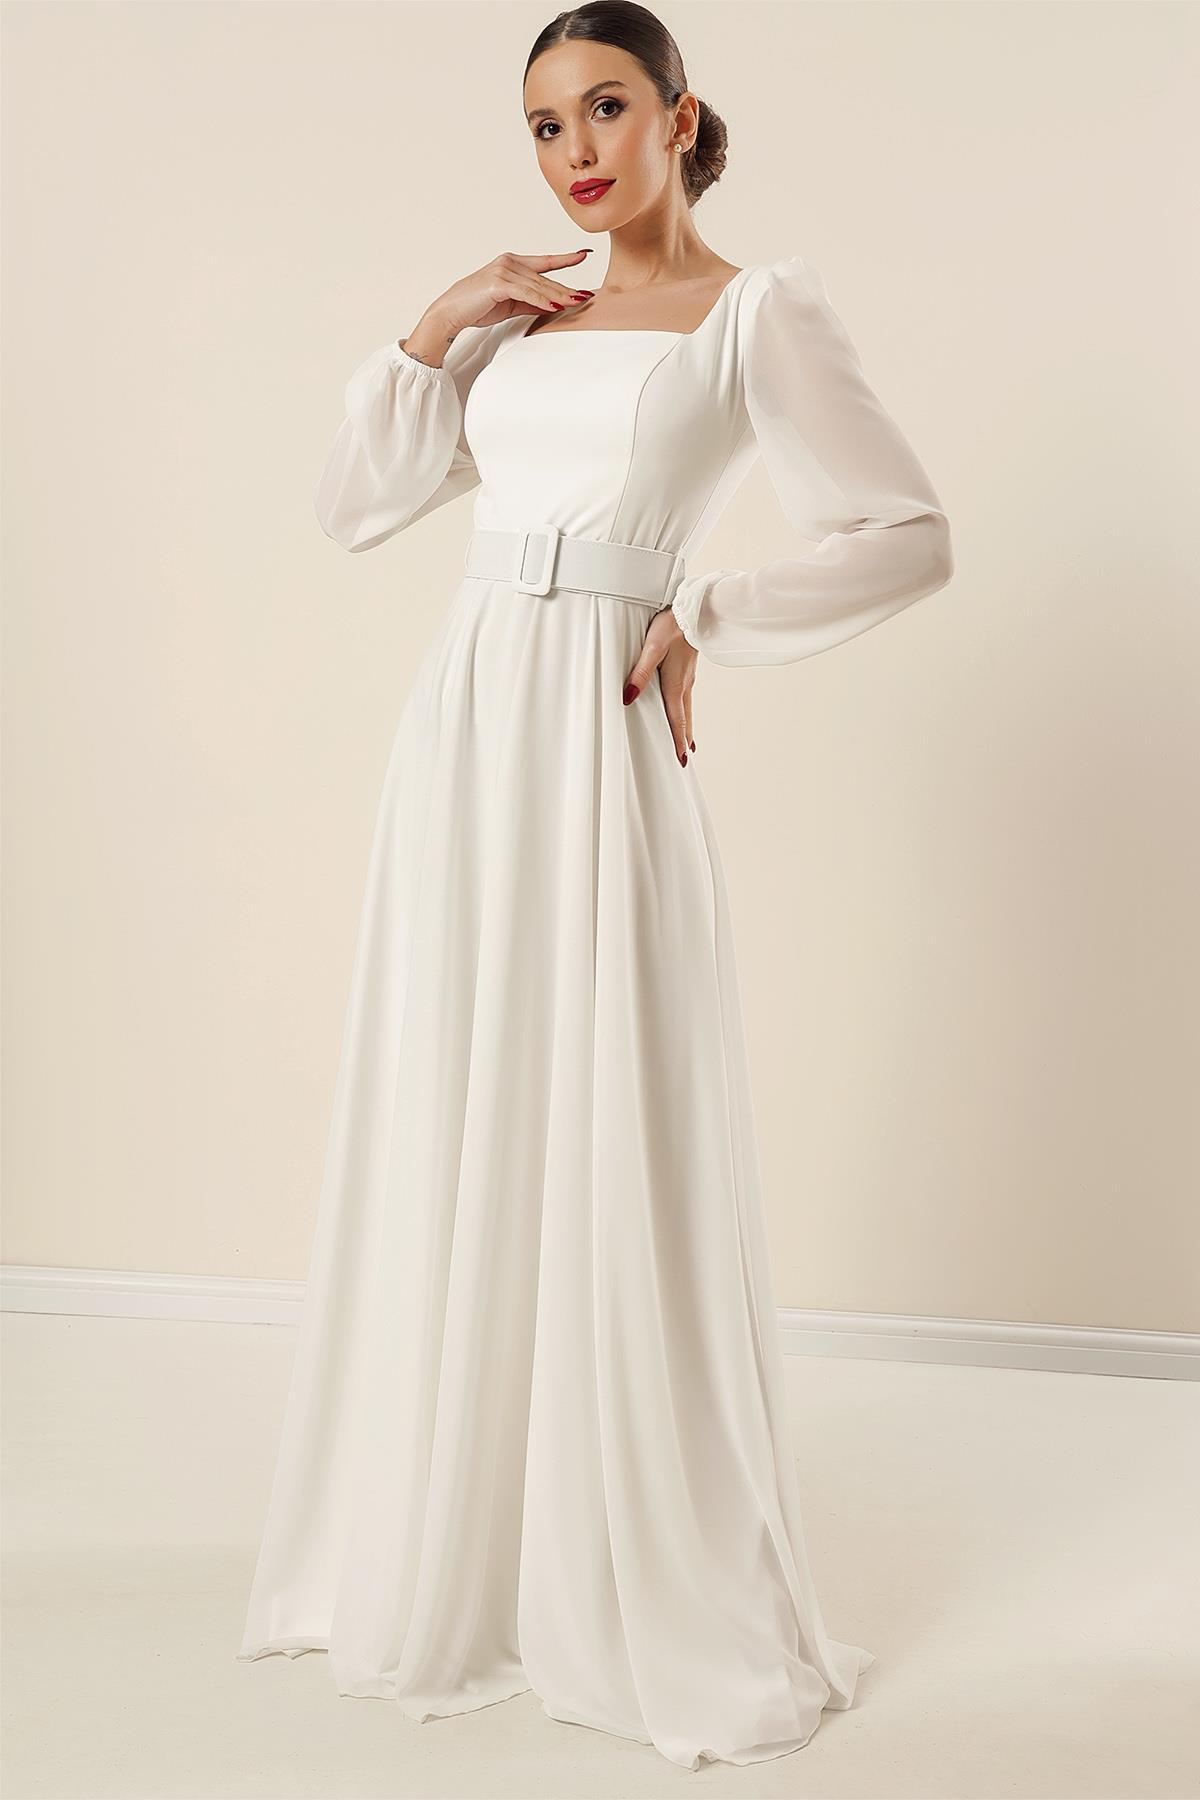 Levně By Saygı Lined Chiffon Long Evening Dress with a Square Neck Waist and Belted Belt.